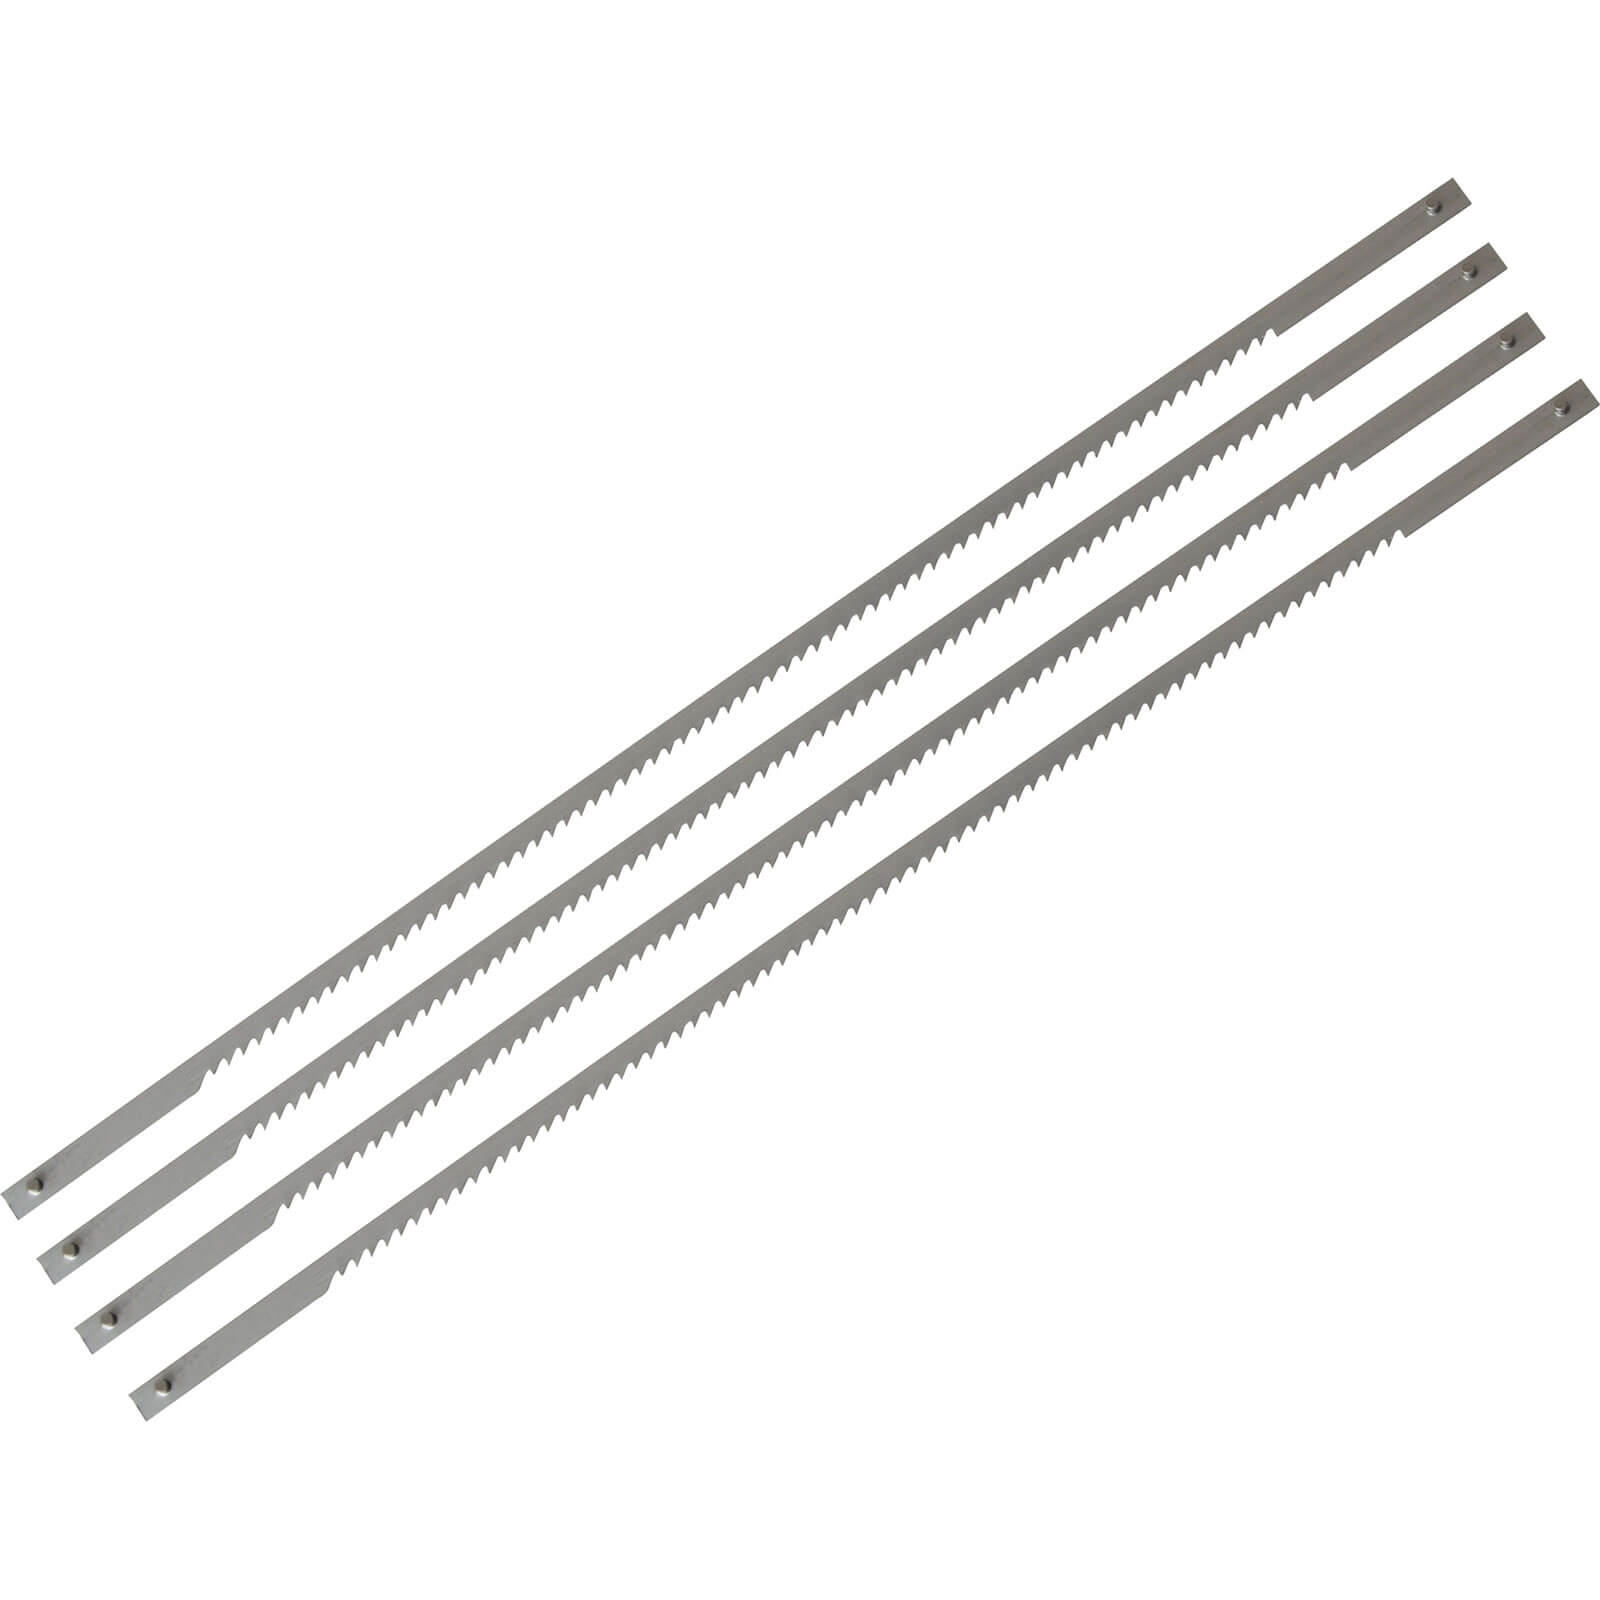 Image of Stanley Coping Saw Blades Pack of 4